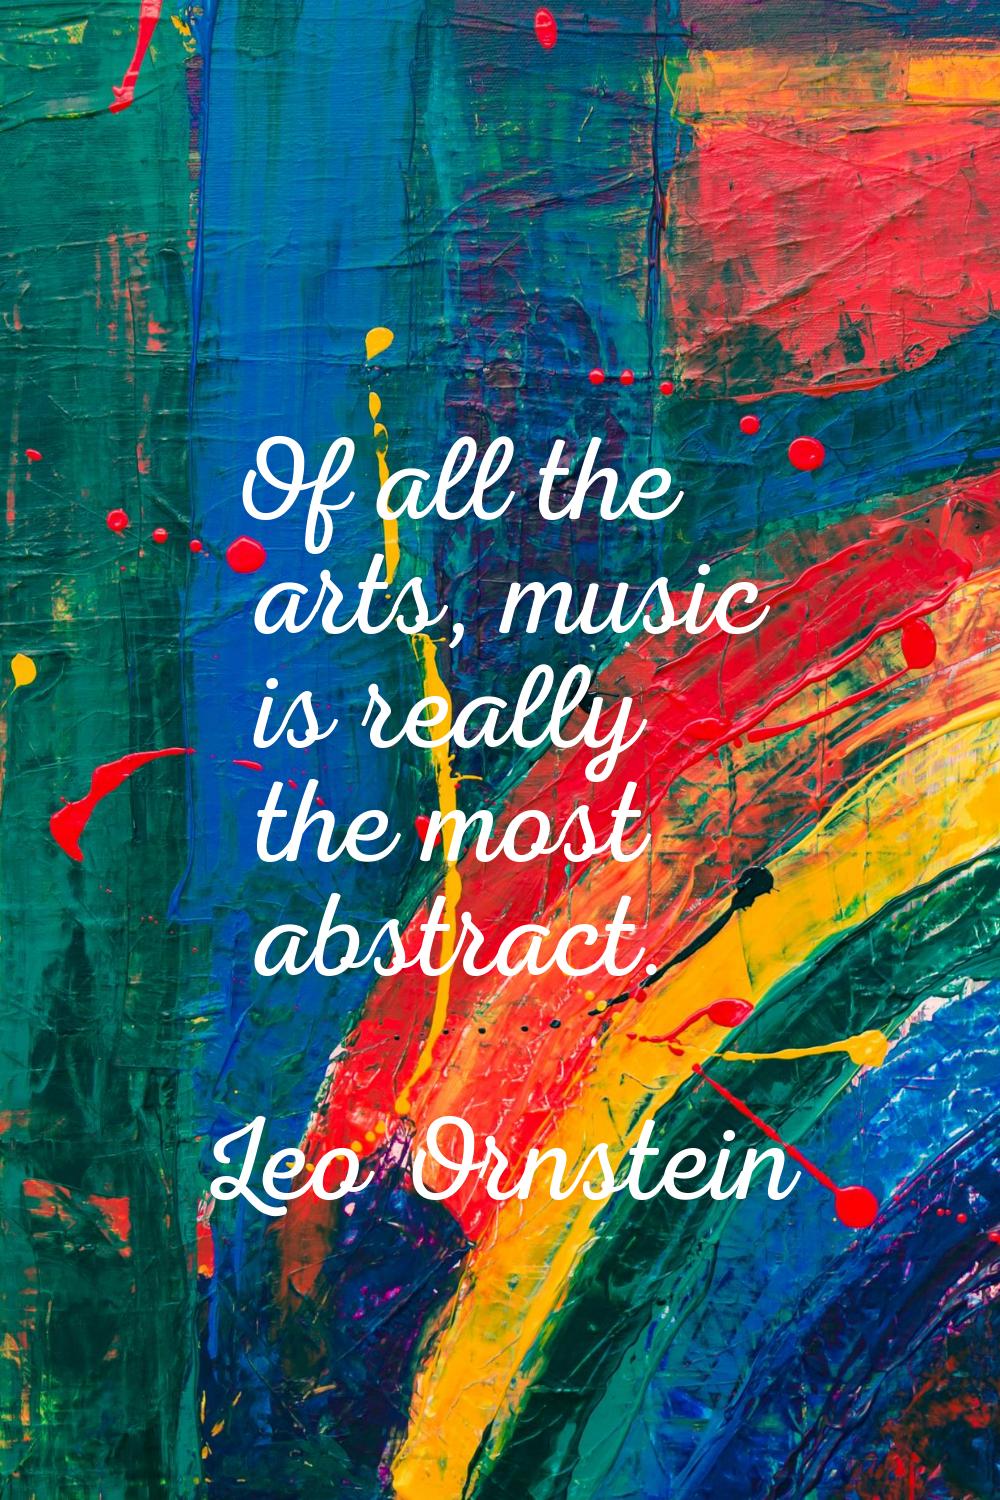 Of all the arts, music is really the most abstract.